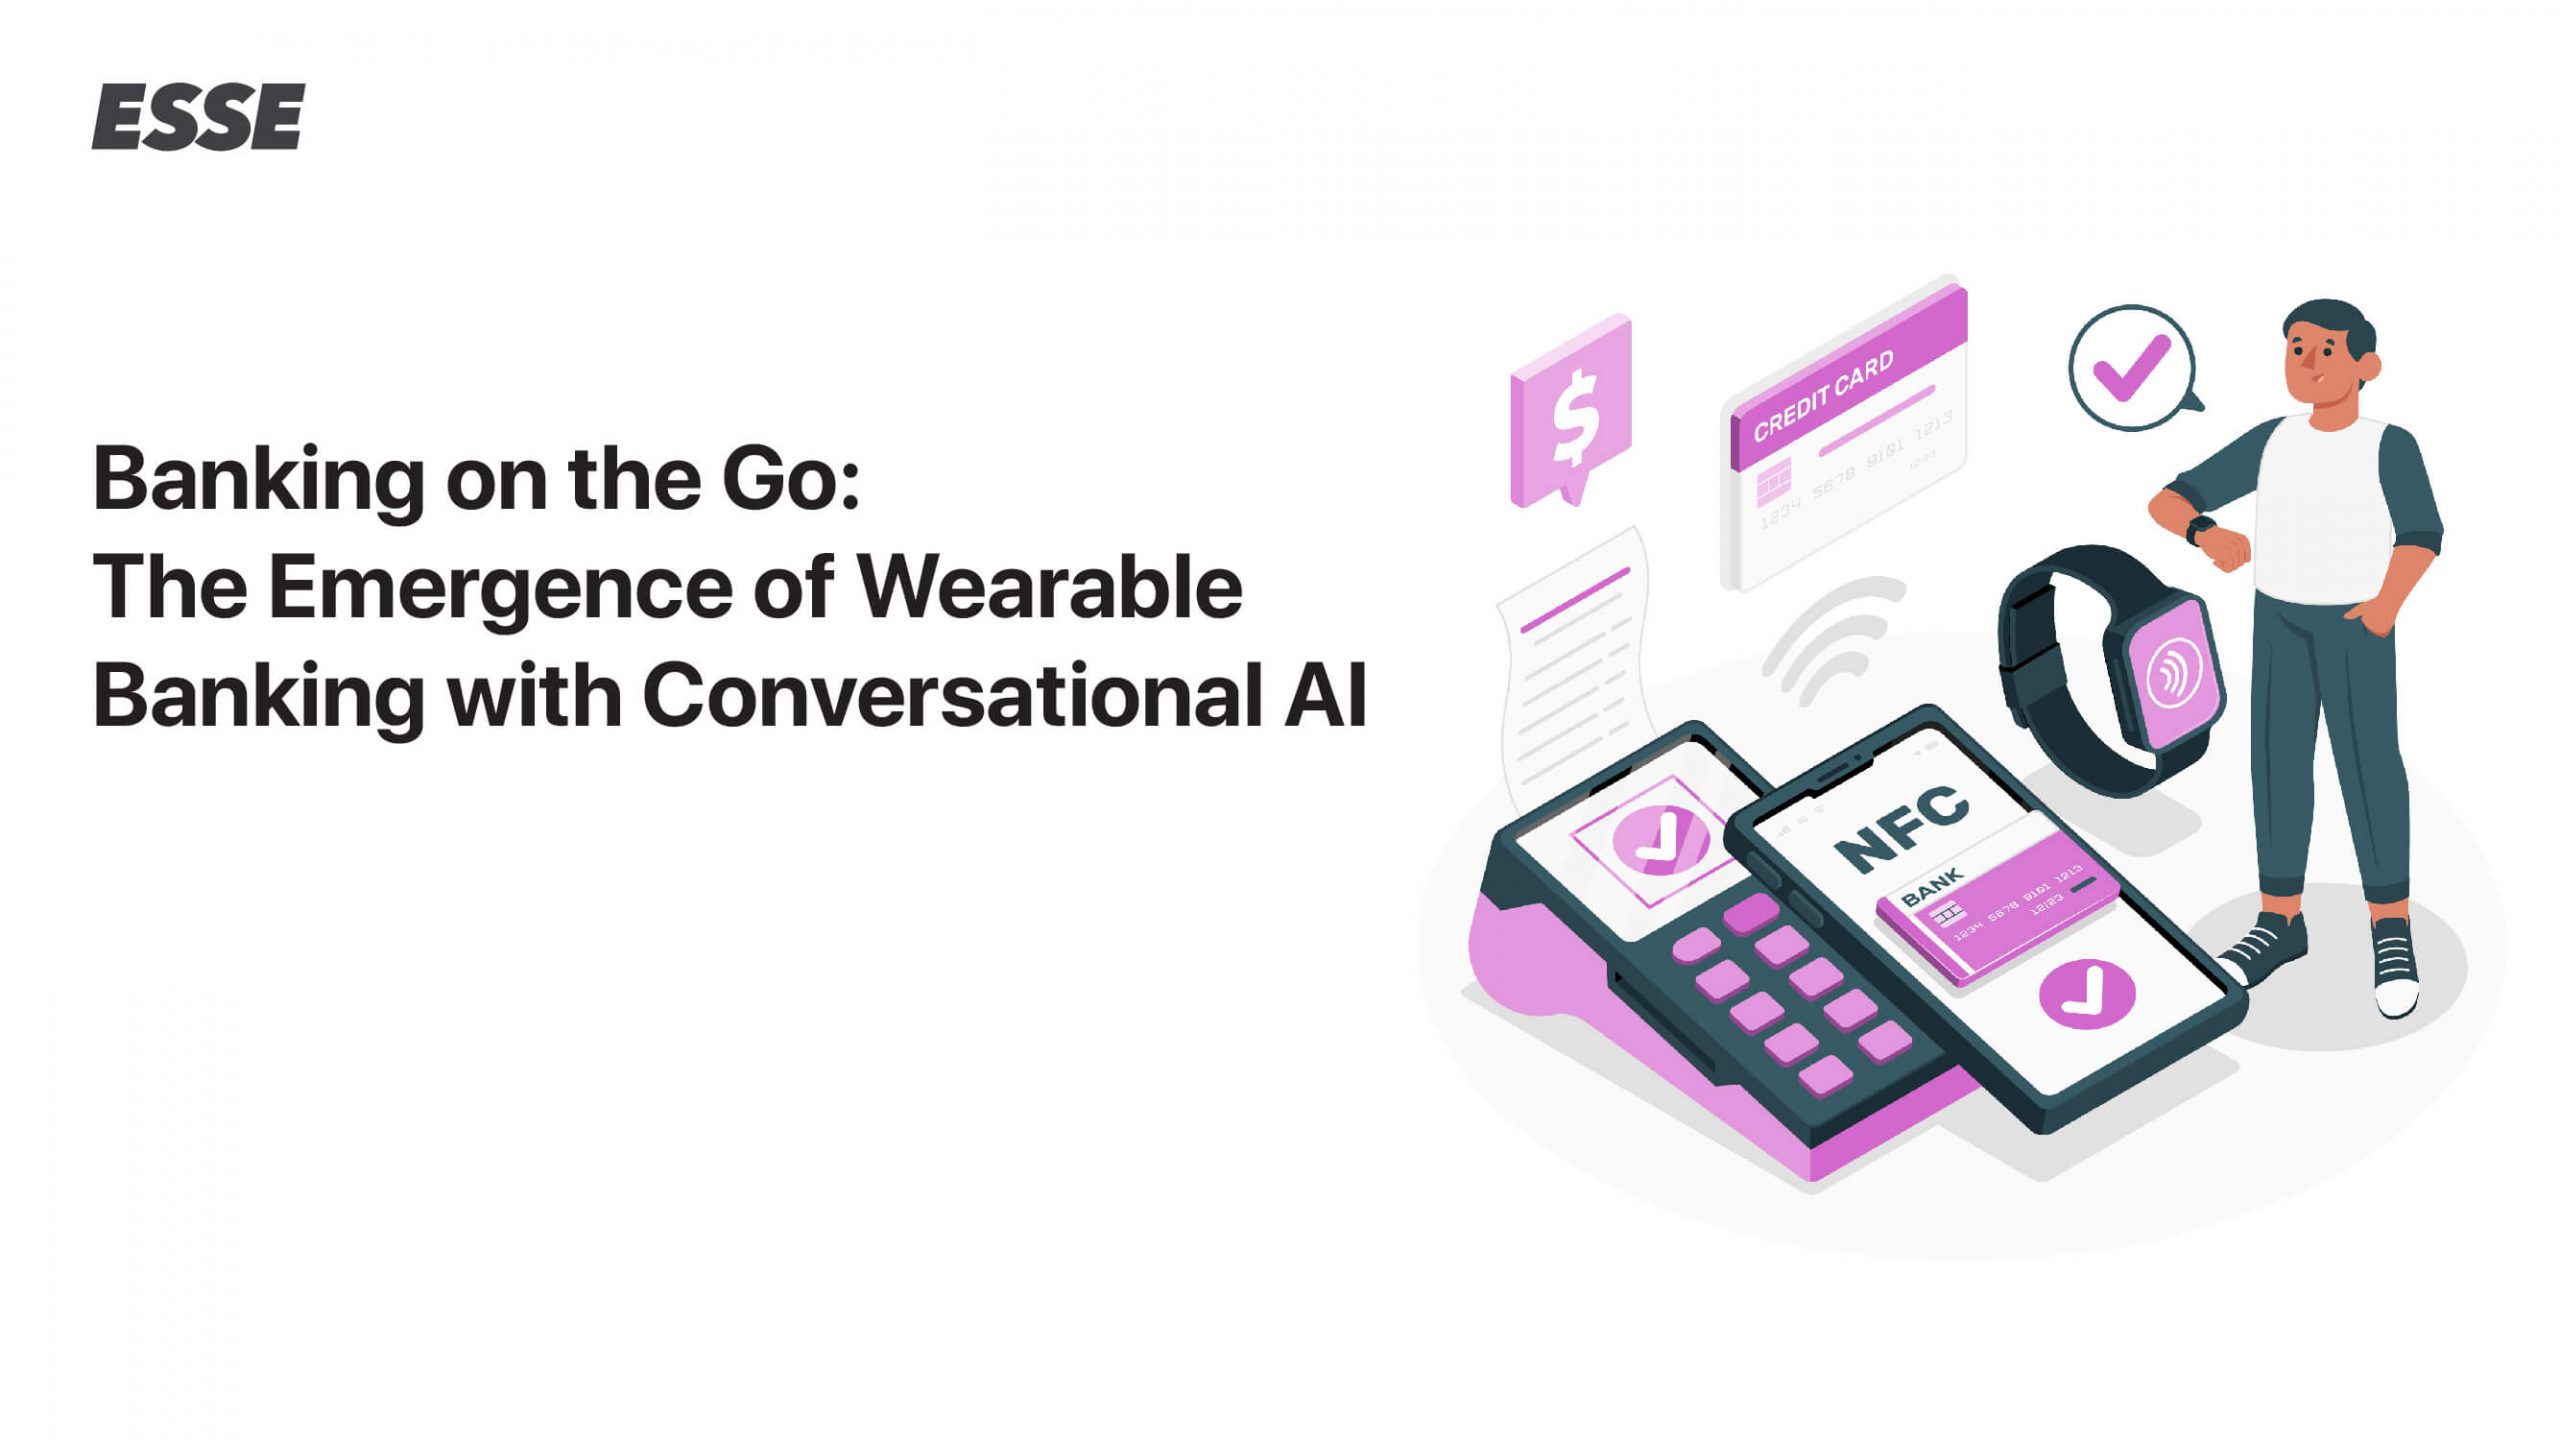 Banking on the Go: The Emergence of Wearable Banking with Conversational AI